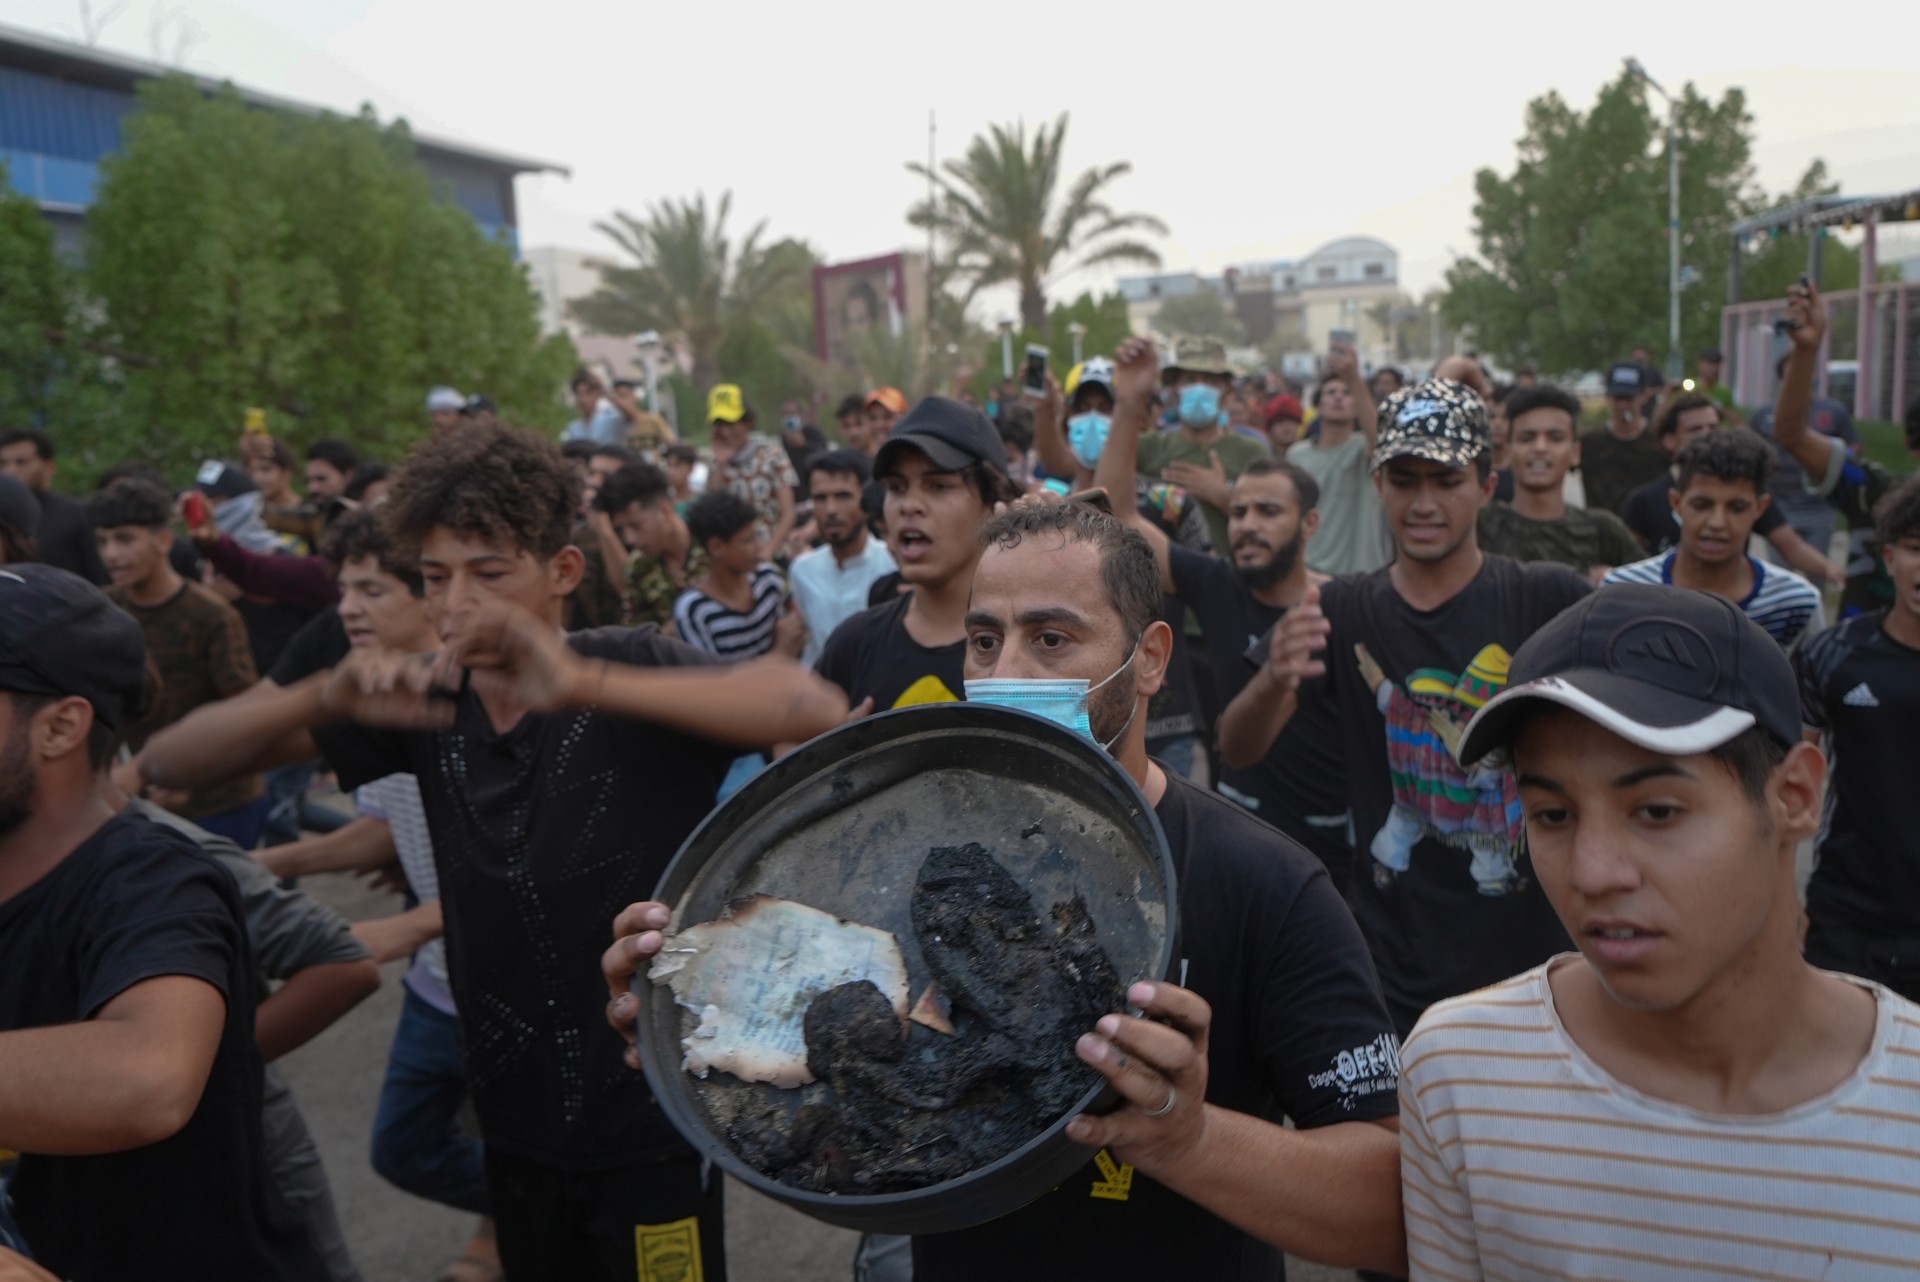 As Iraqis protest in Nasiriyah, one man holds a dish containing burnt remains of a victim (MEE/Azhar Al-Rubaie)